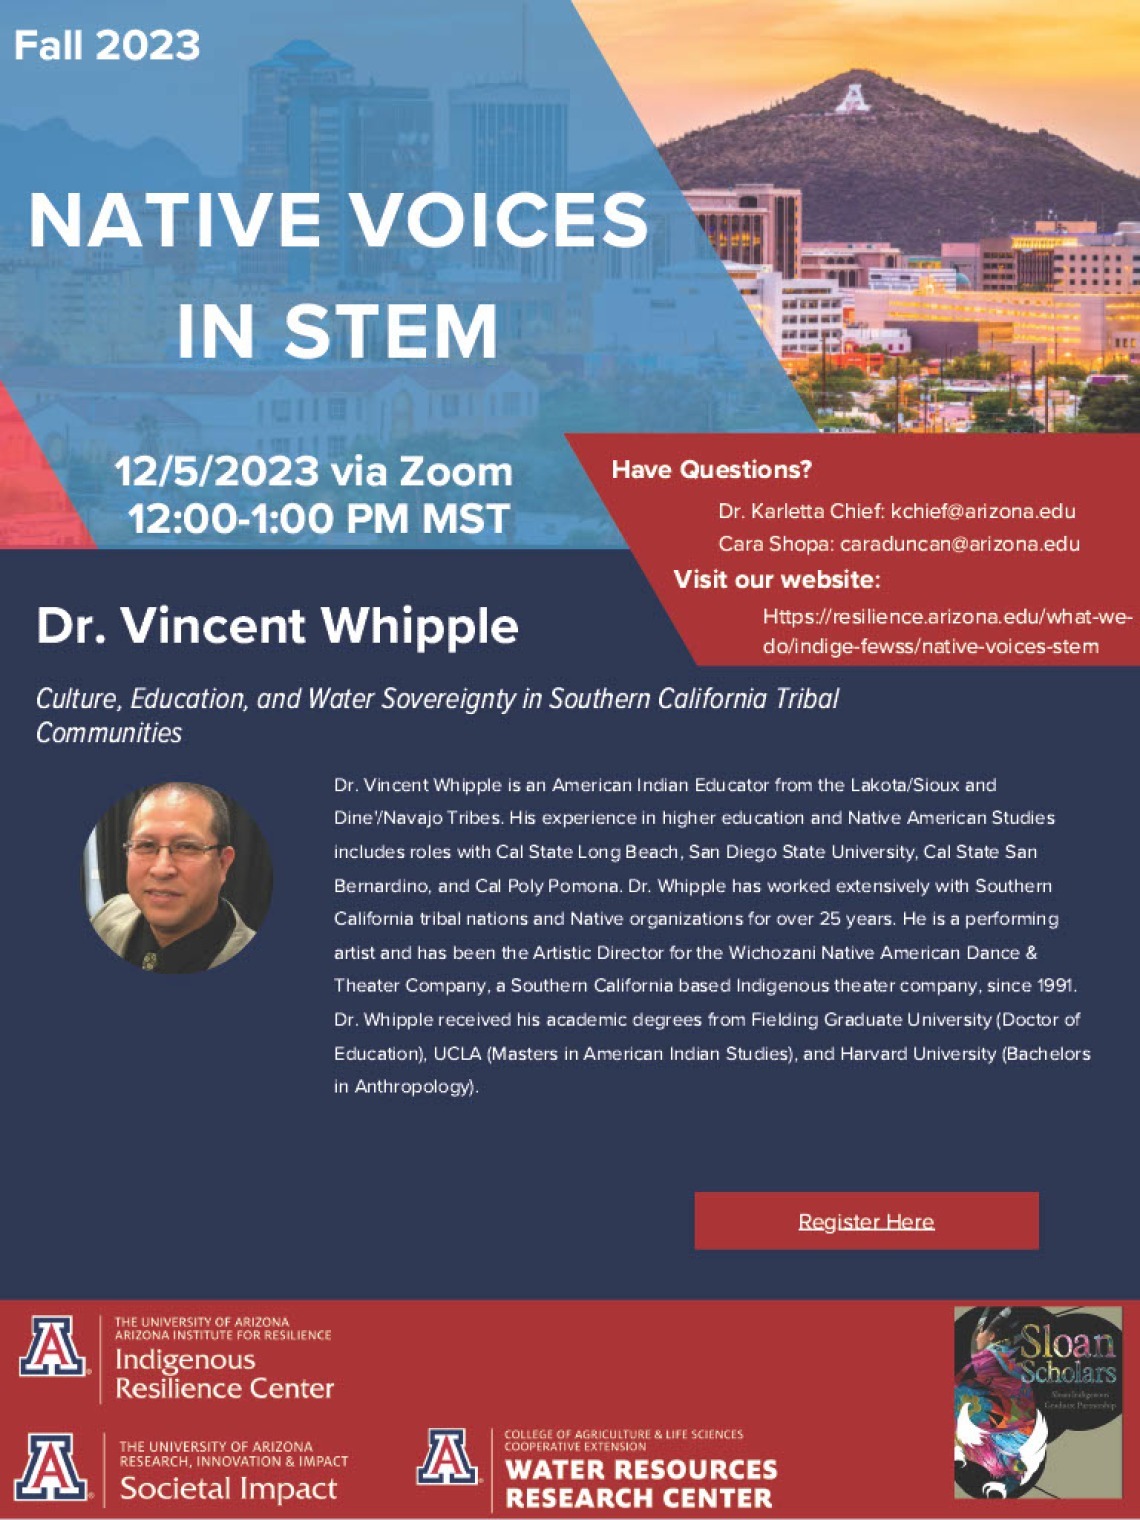 Dr. Vincent Whipple's Native Voices in STEM Seminar